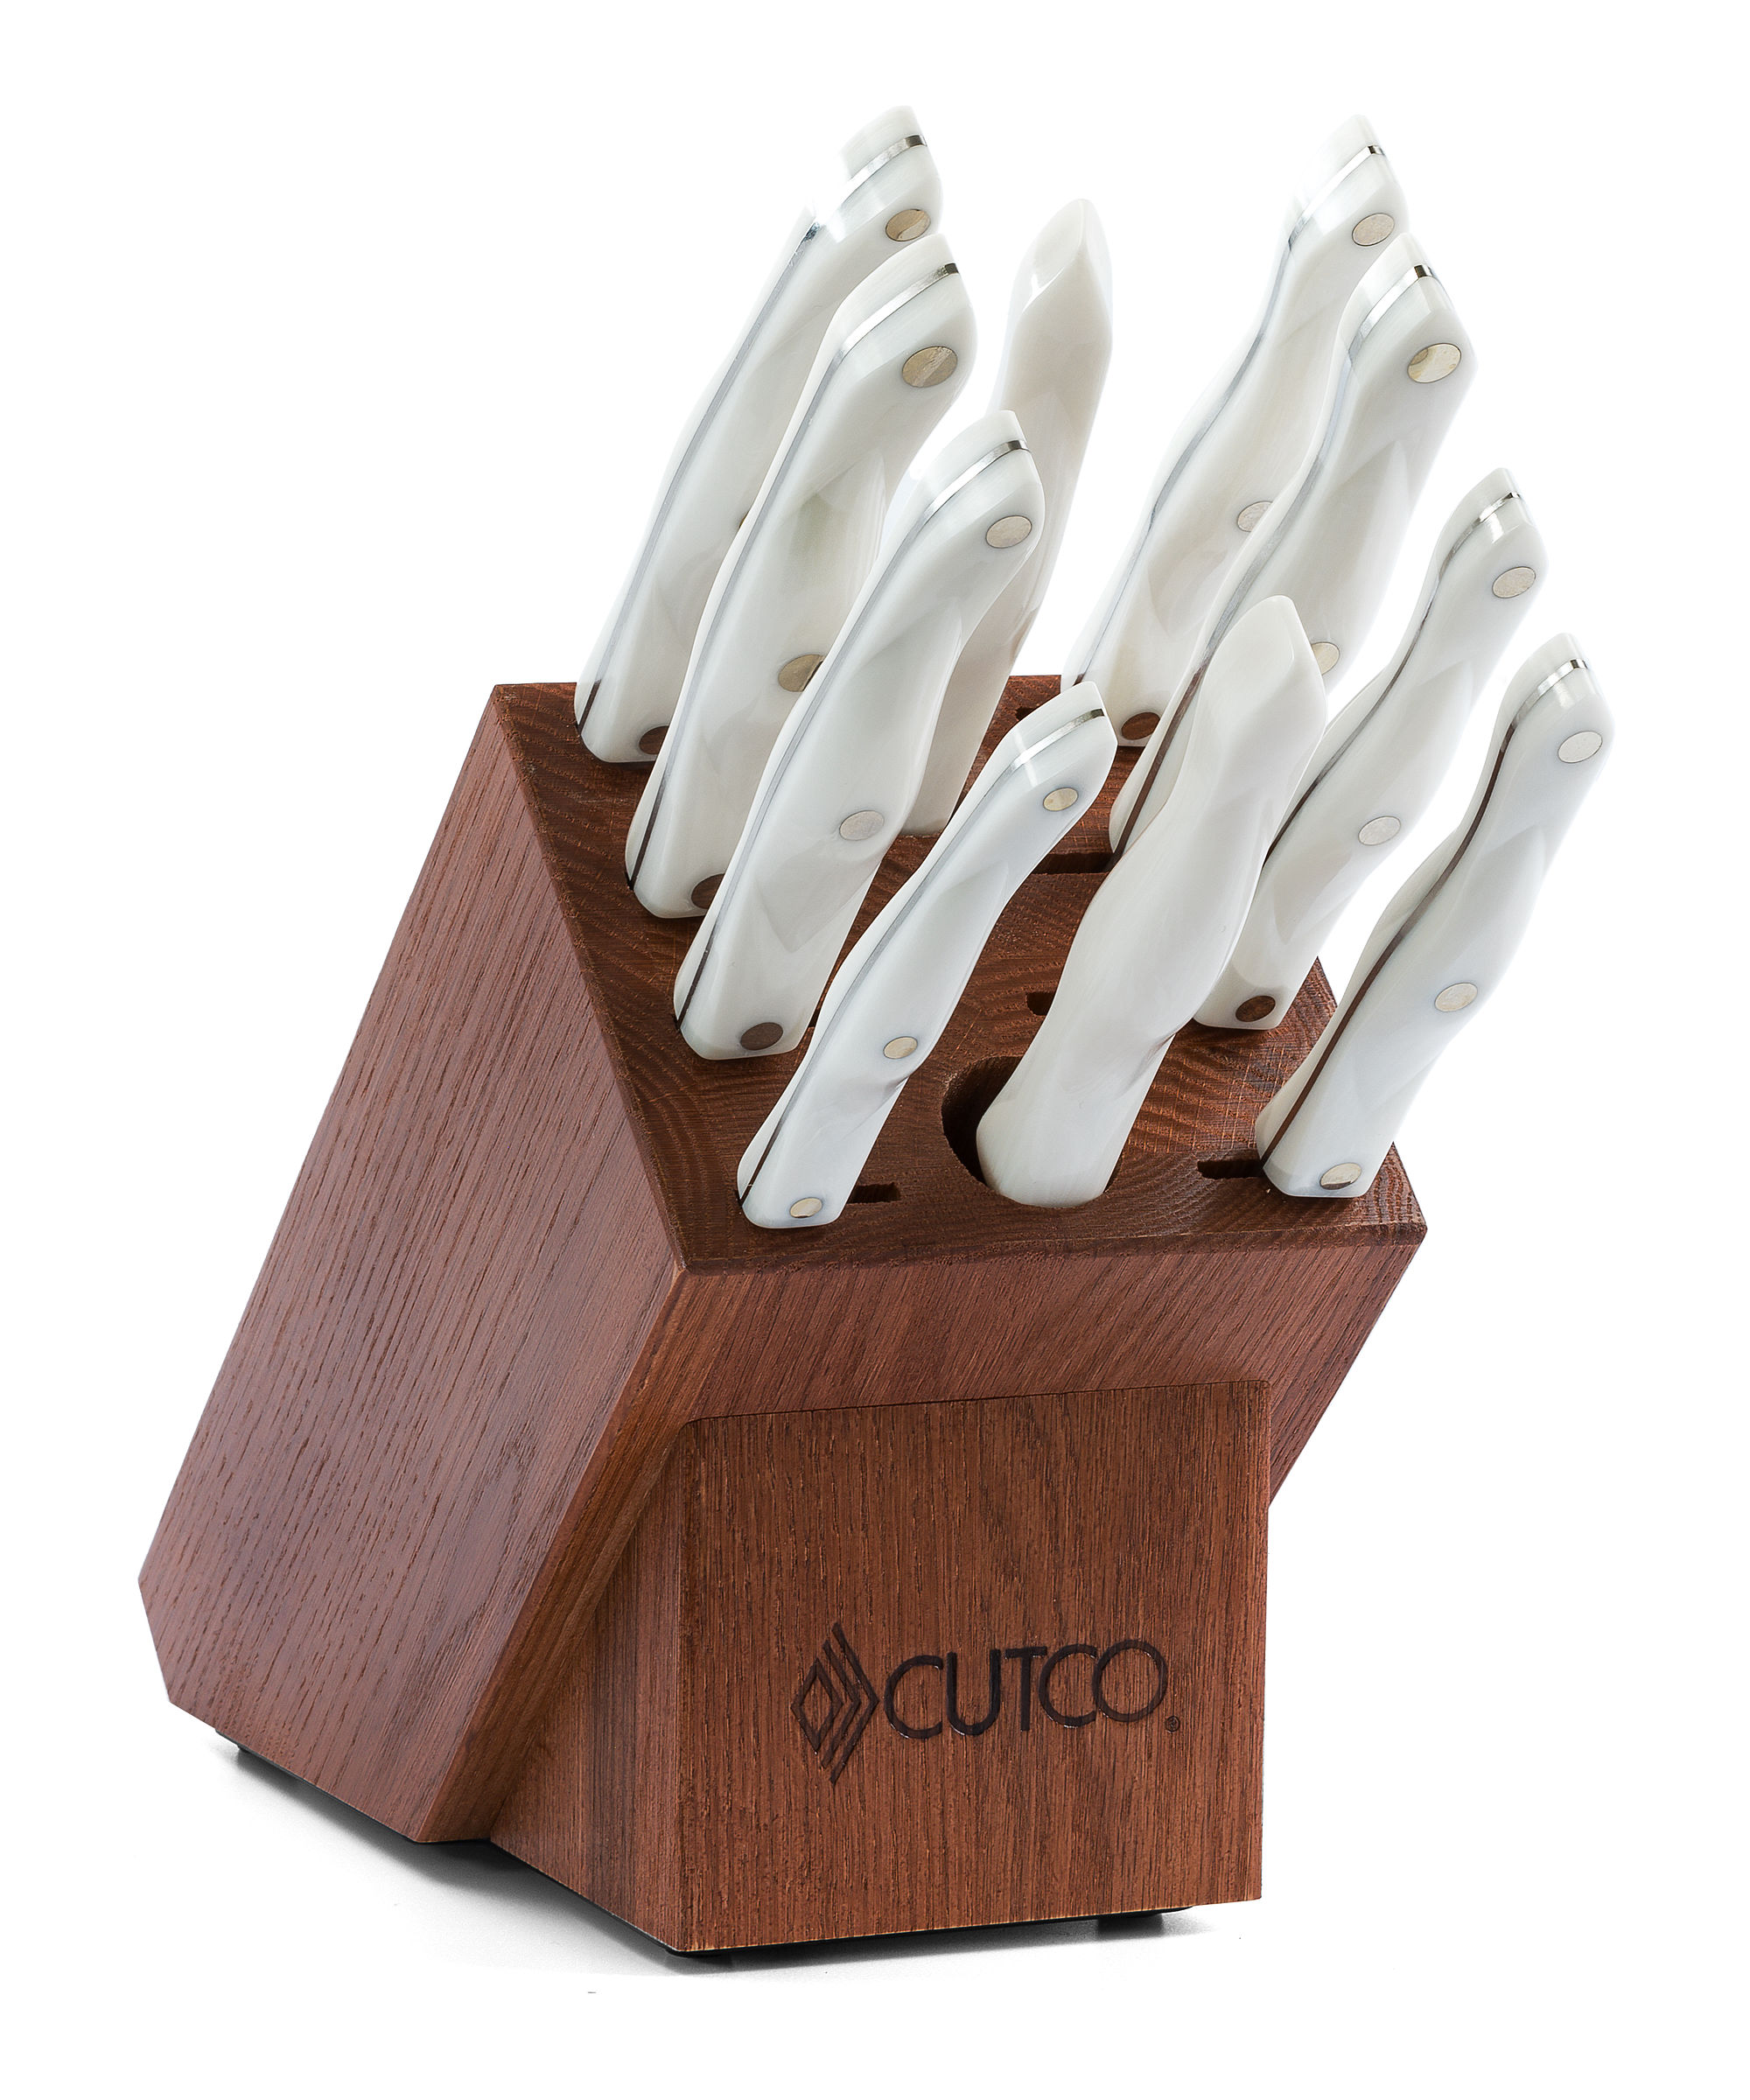 Cutco French Chef Homemaker + 8 Classic Knife Set with Oak Block -  household items - by owner - housewares sale 